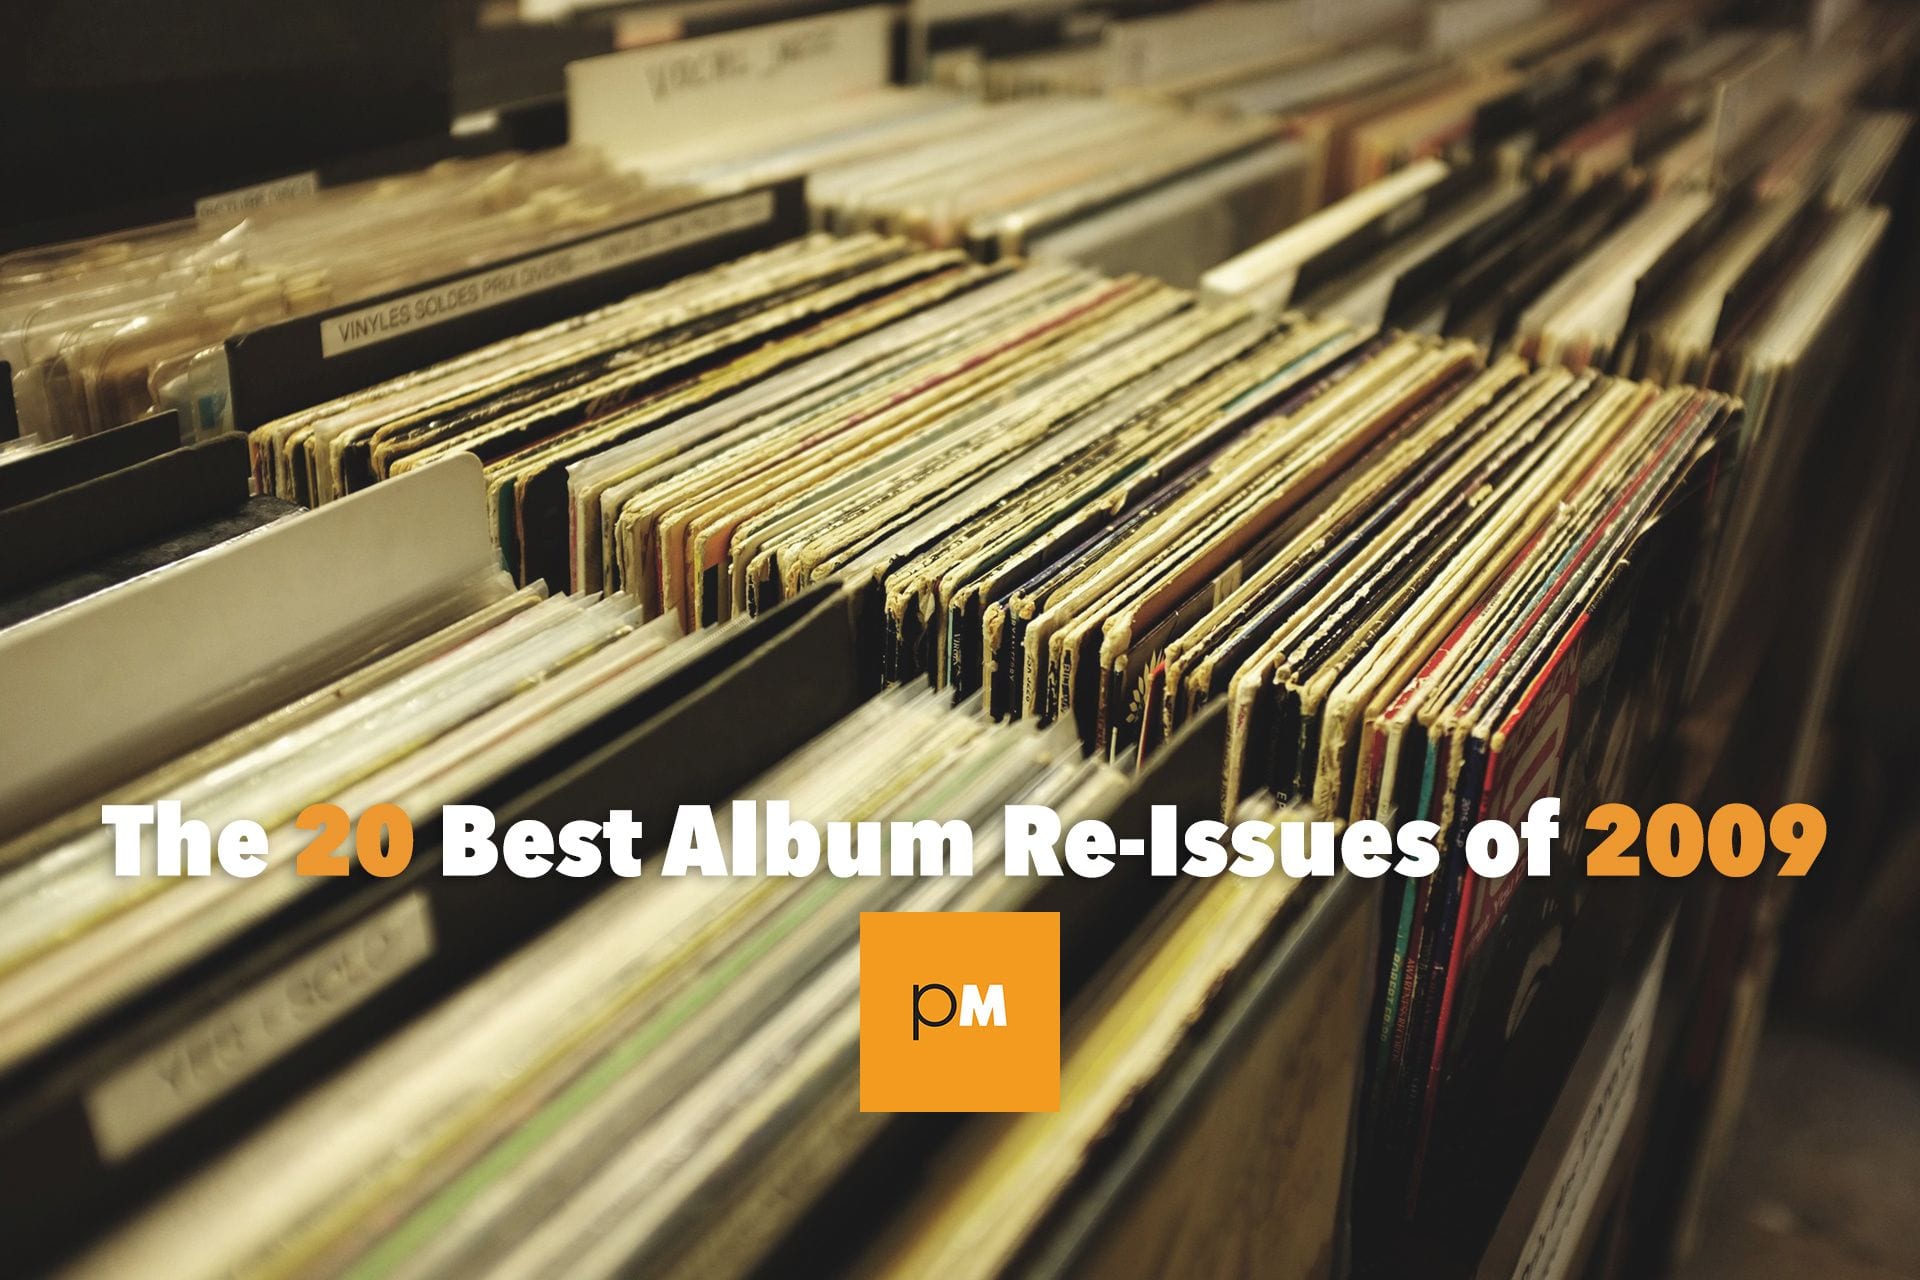 The 20 Best Album Re-Issues of 2009